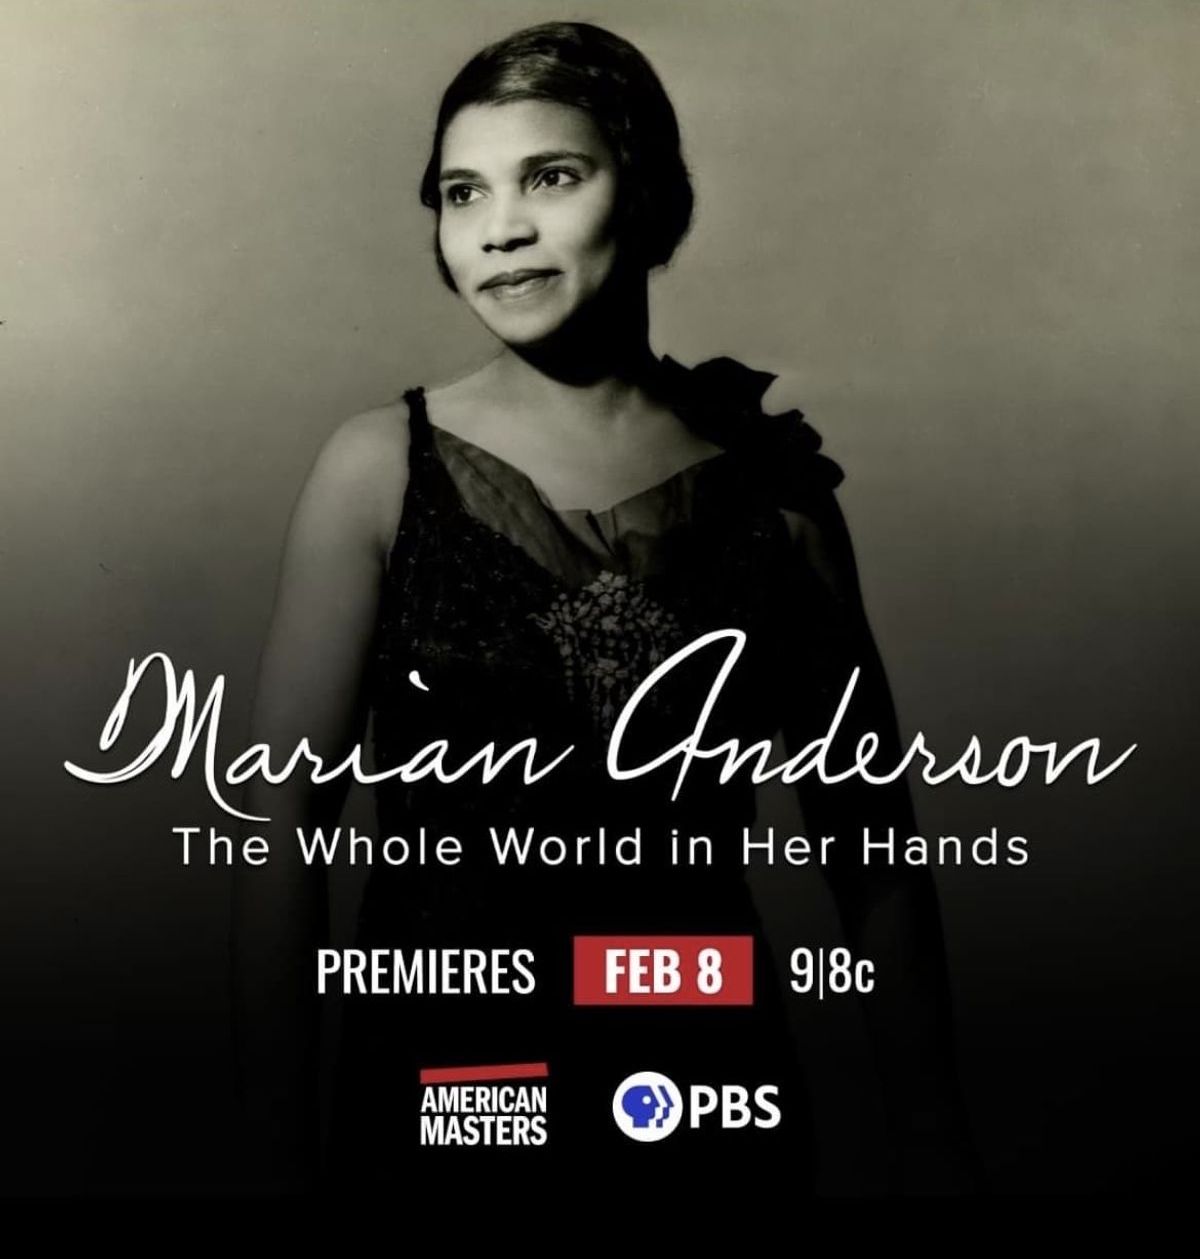 Is “American Masters Marian Anderson The Whole World in Her Hands” on PBS